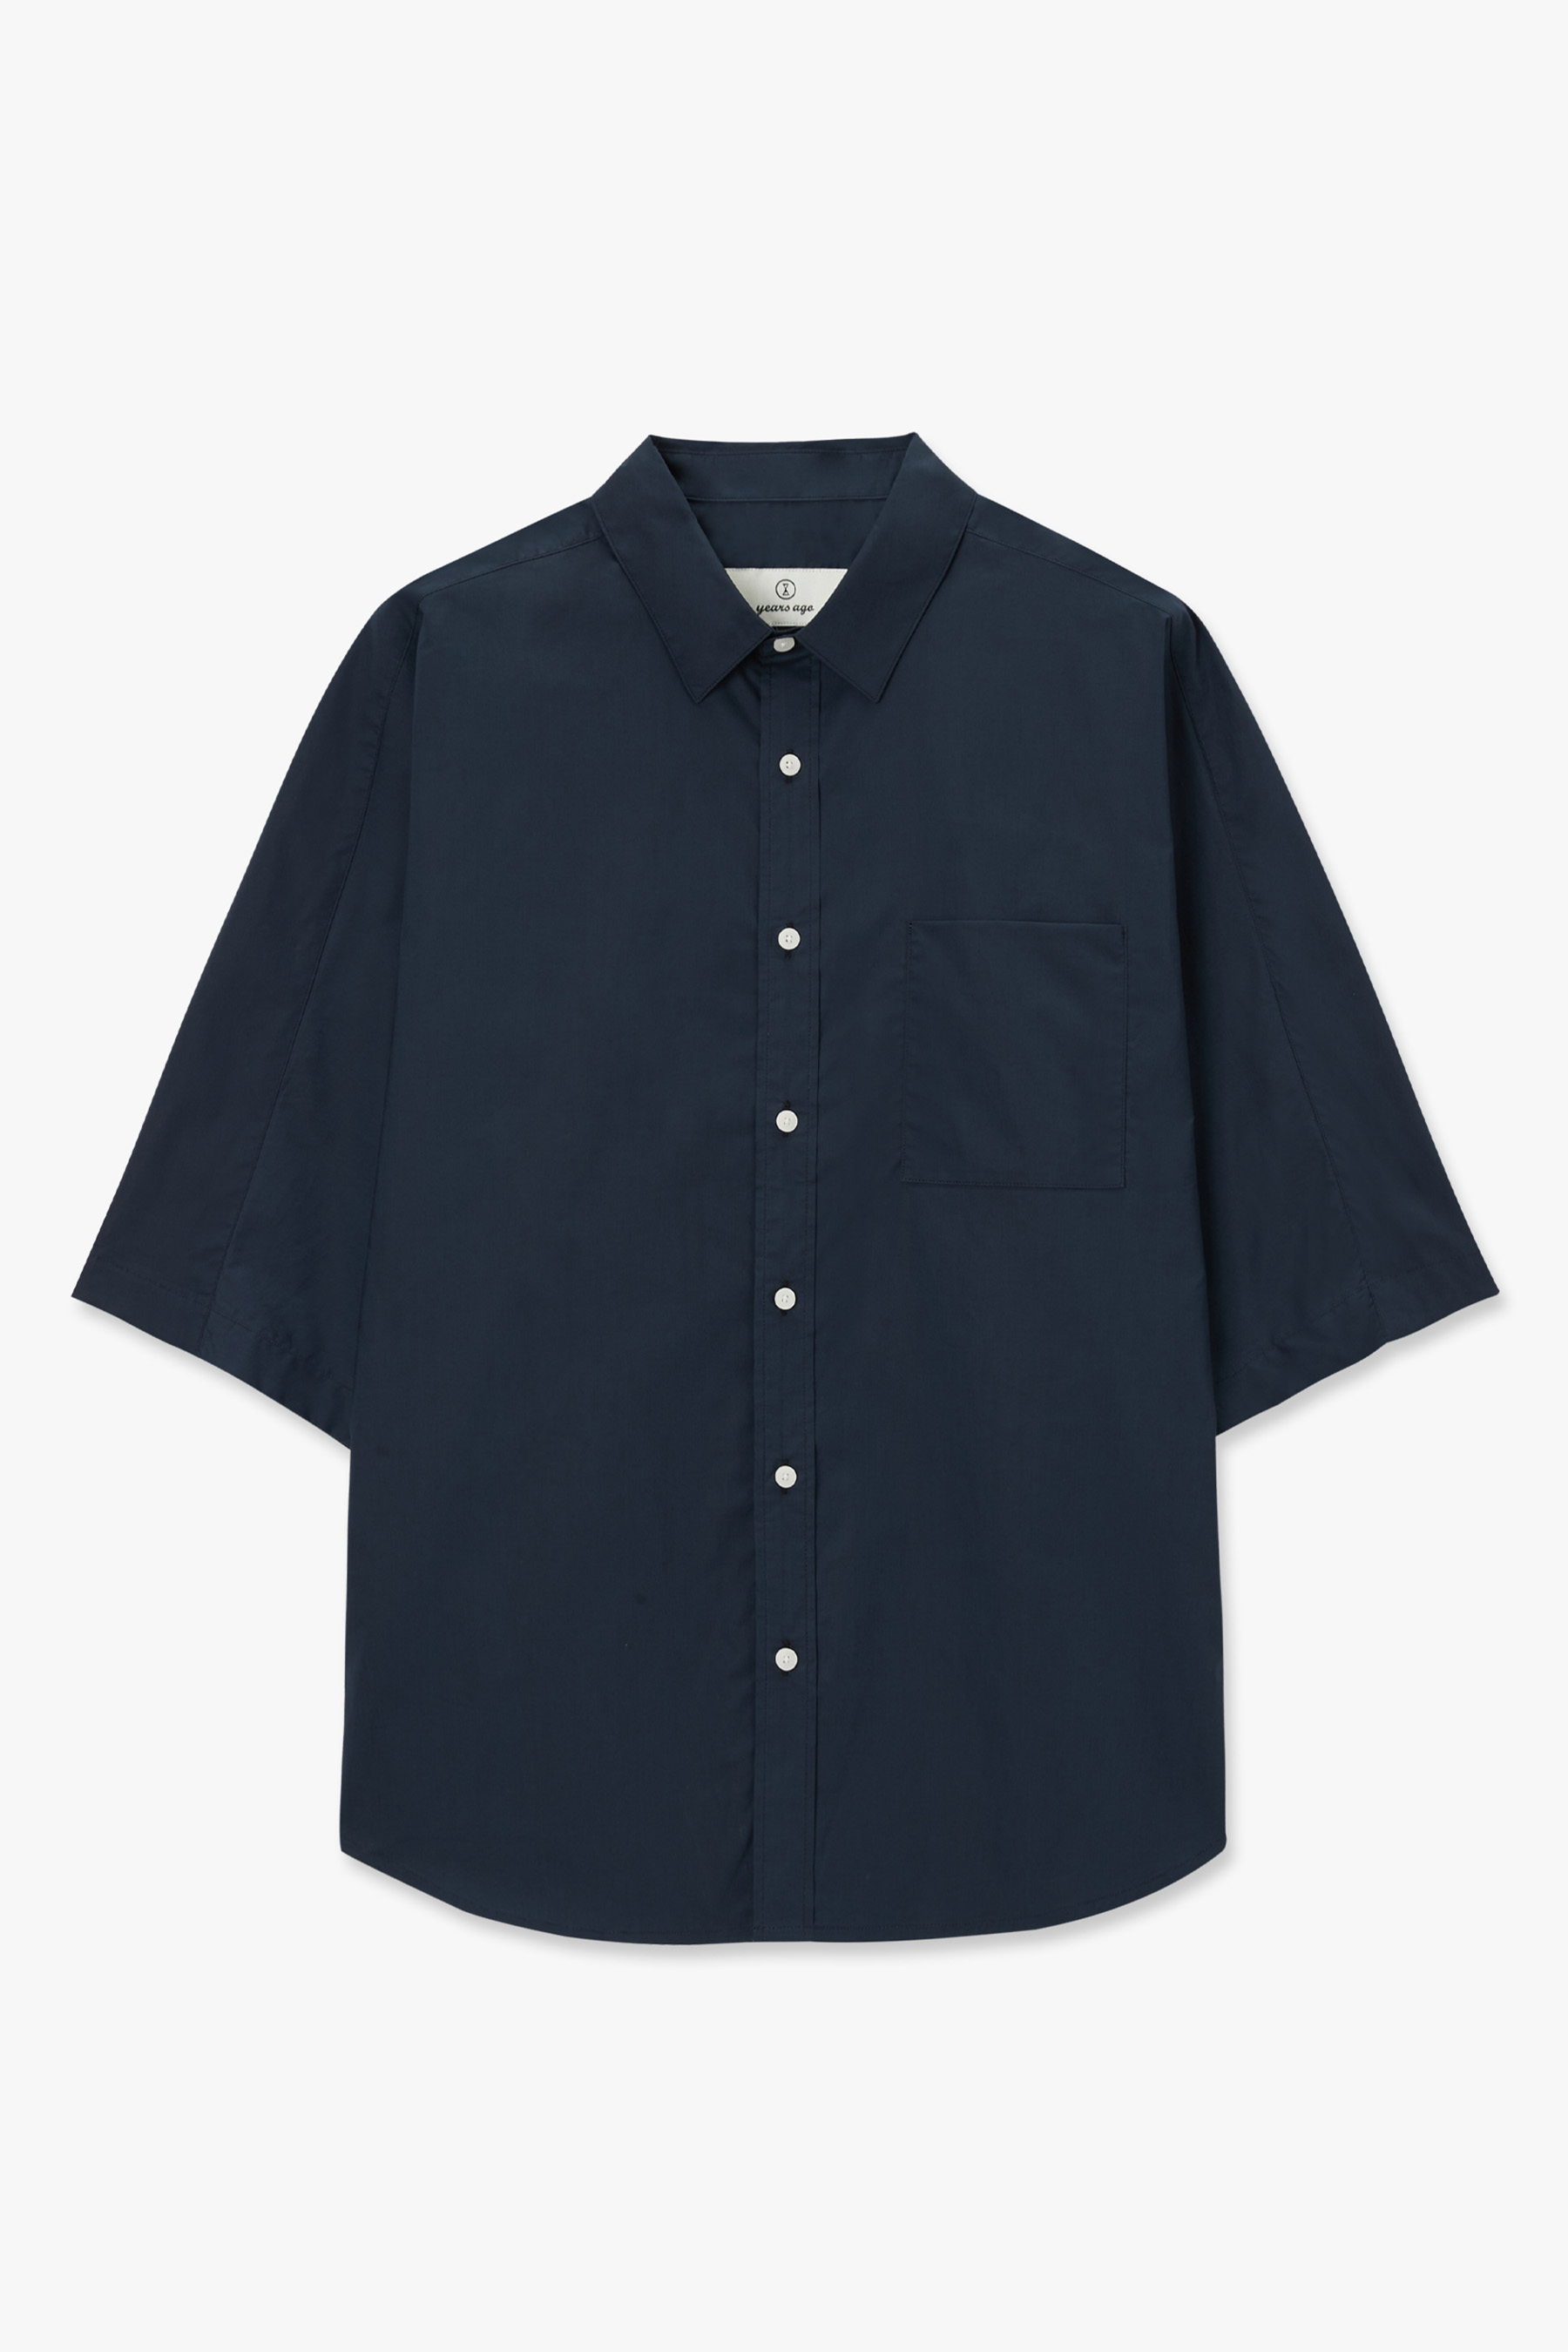 DEEP NAVY COVERABLE SHIRTS 02